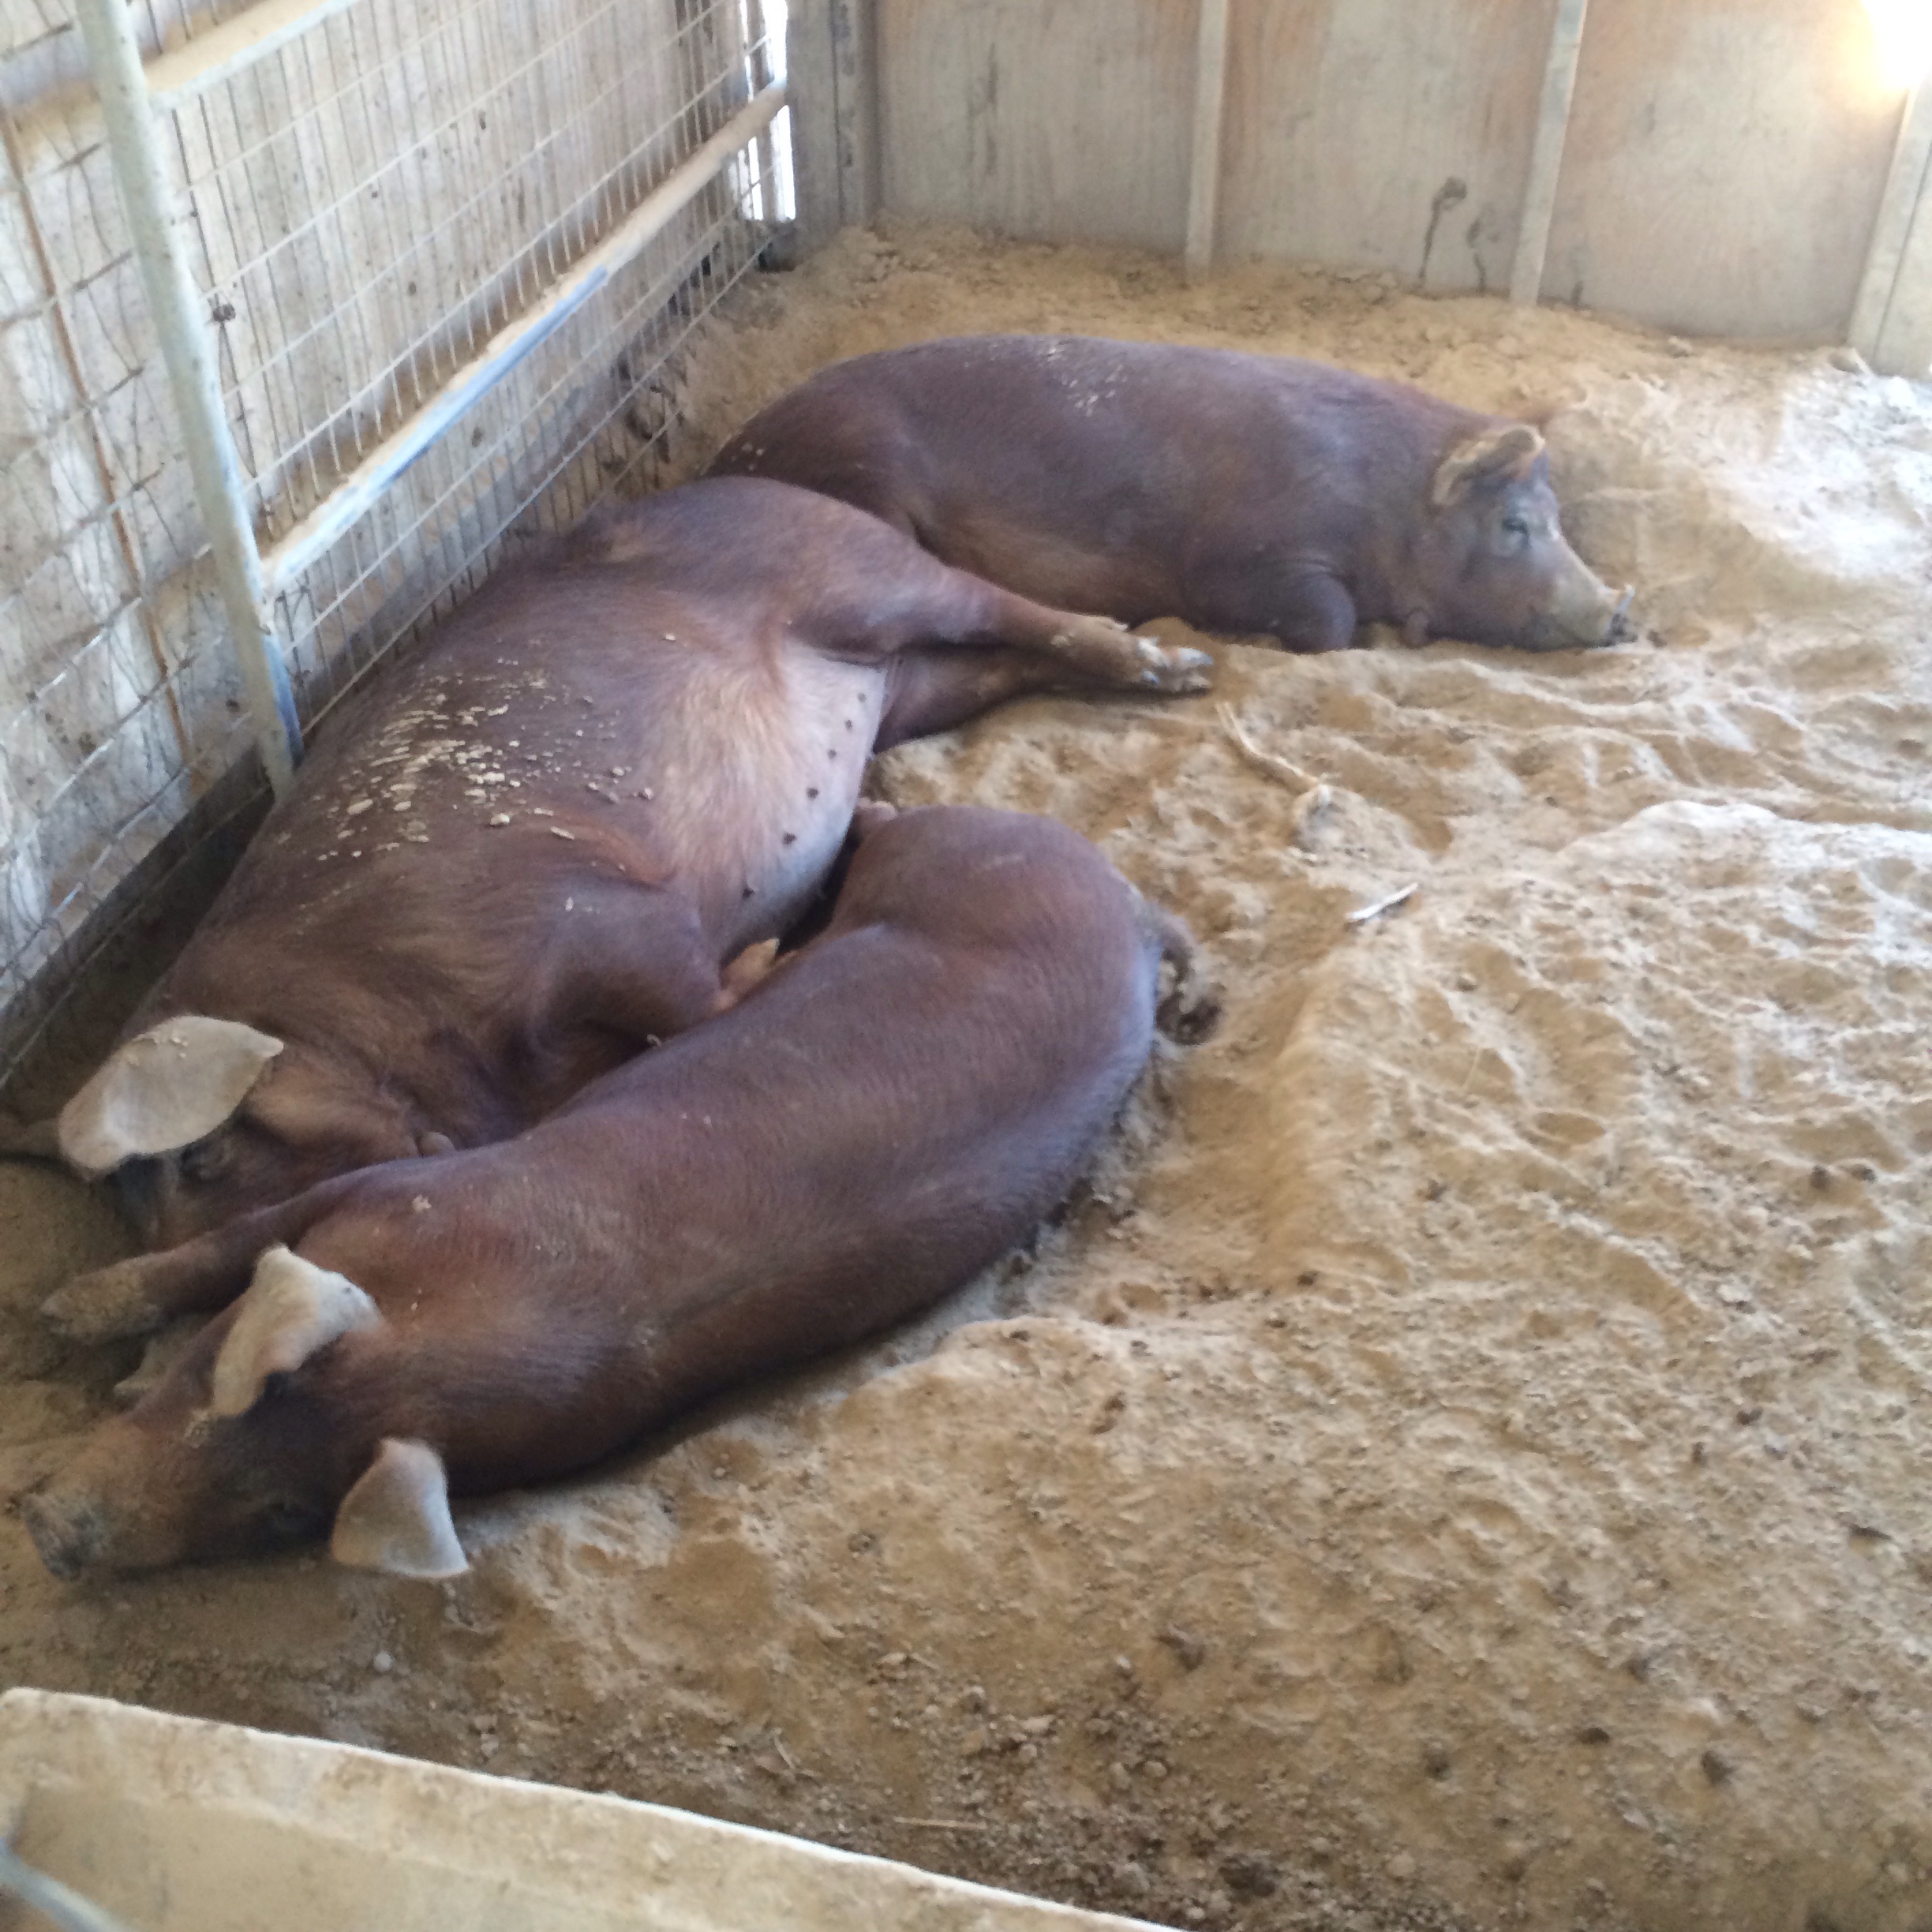 They are taking a nap all the pigs sleep in piles sad to see one alone. That is one of the first things we learned when we went to bio dynamic school was happy animals do not like being alone